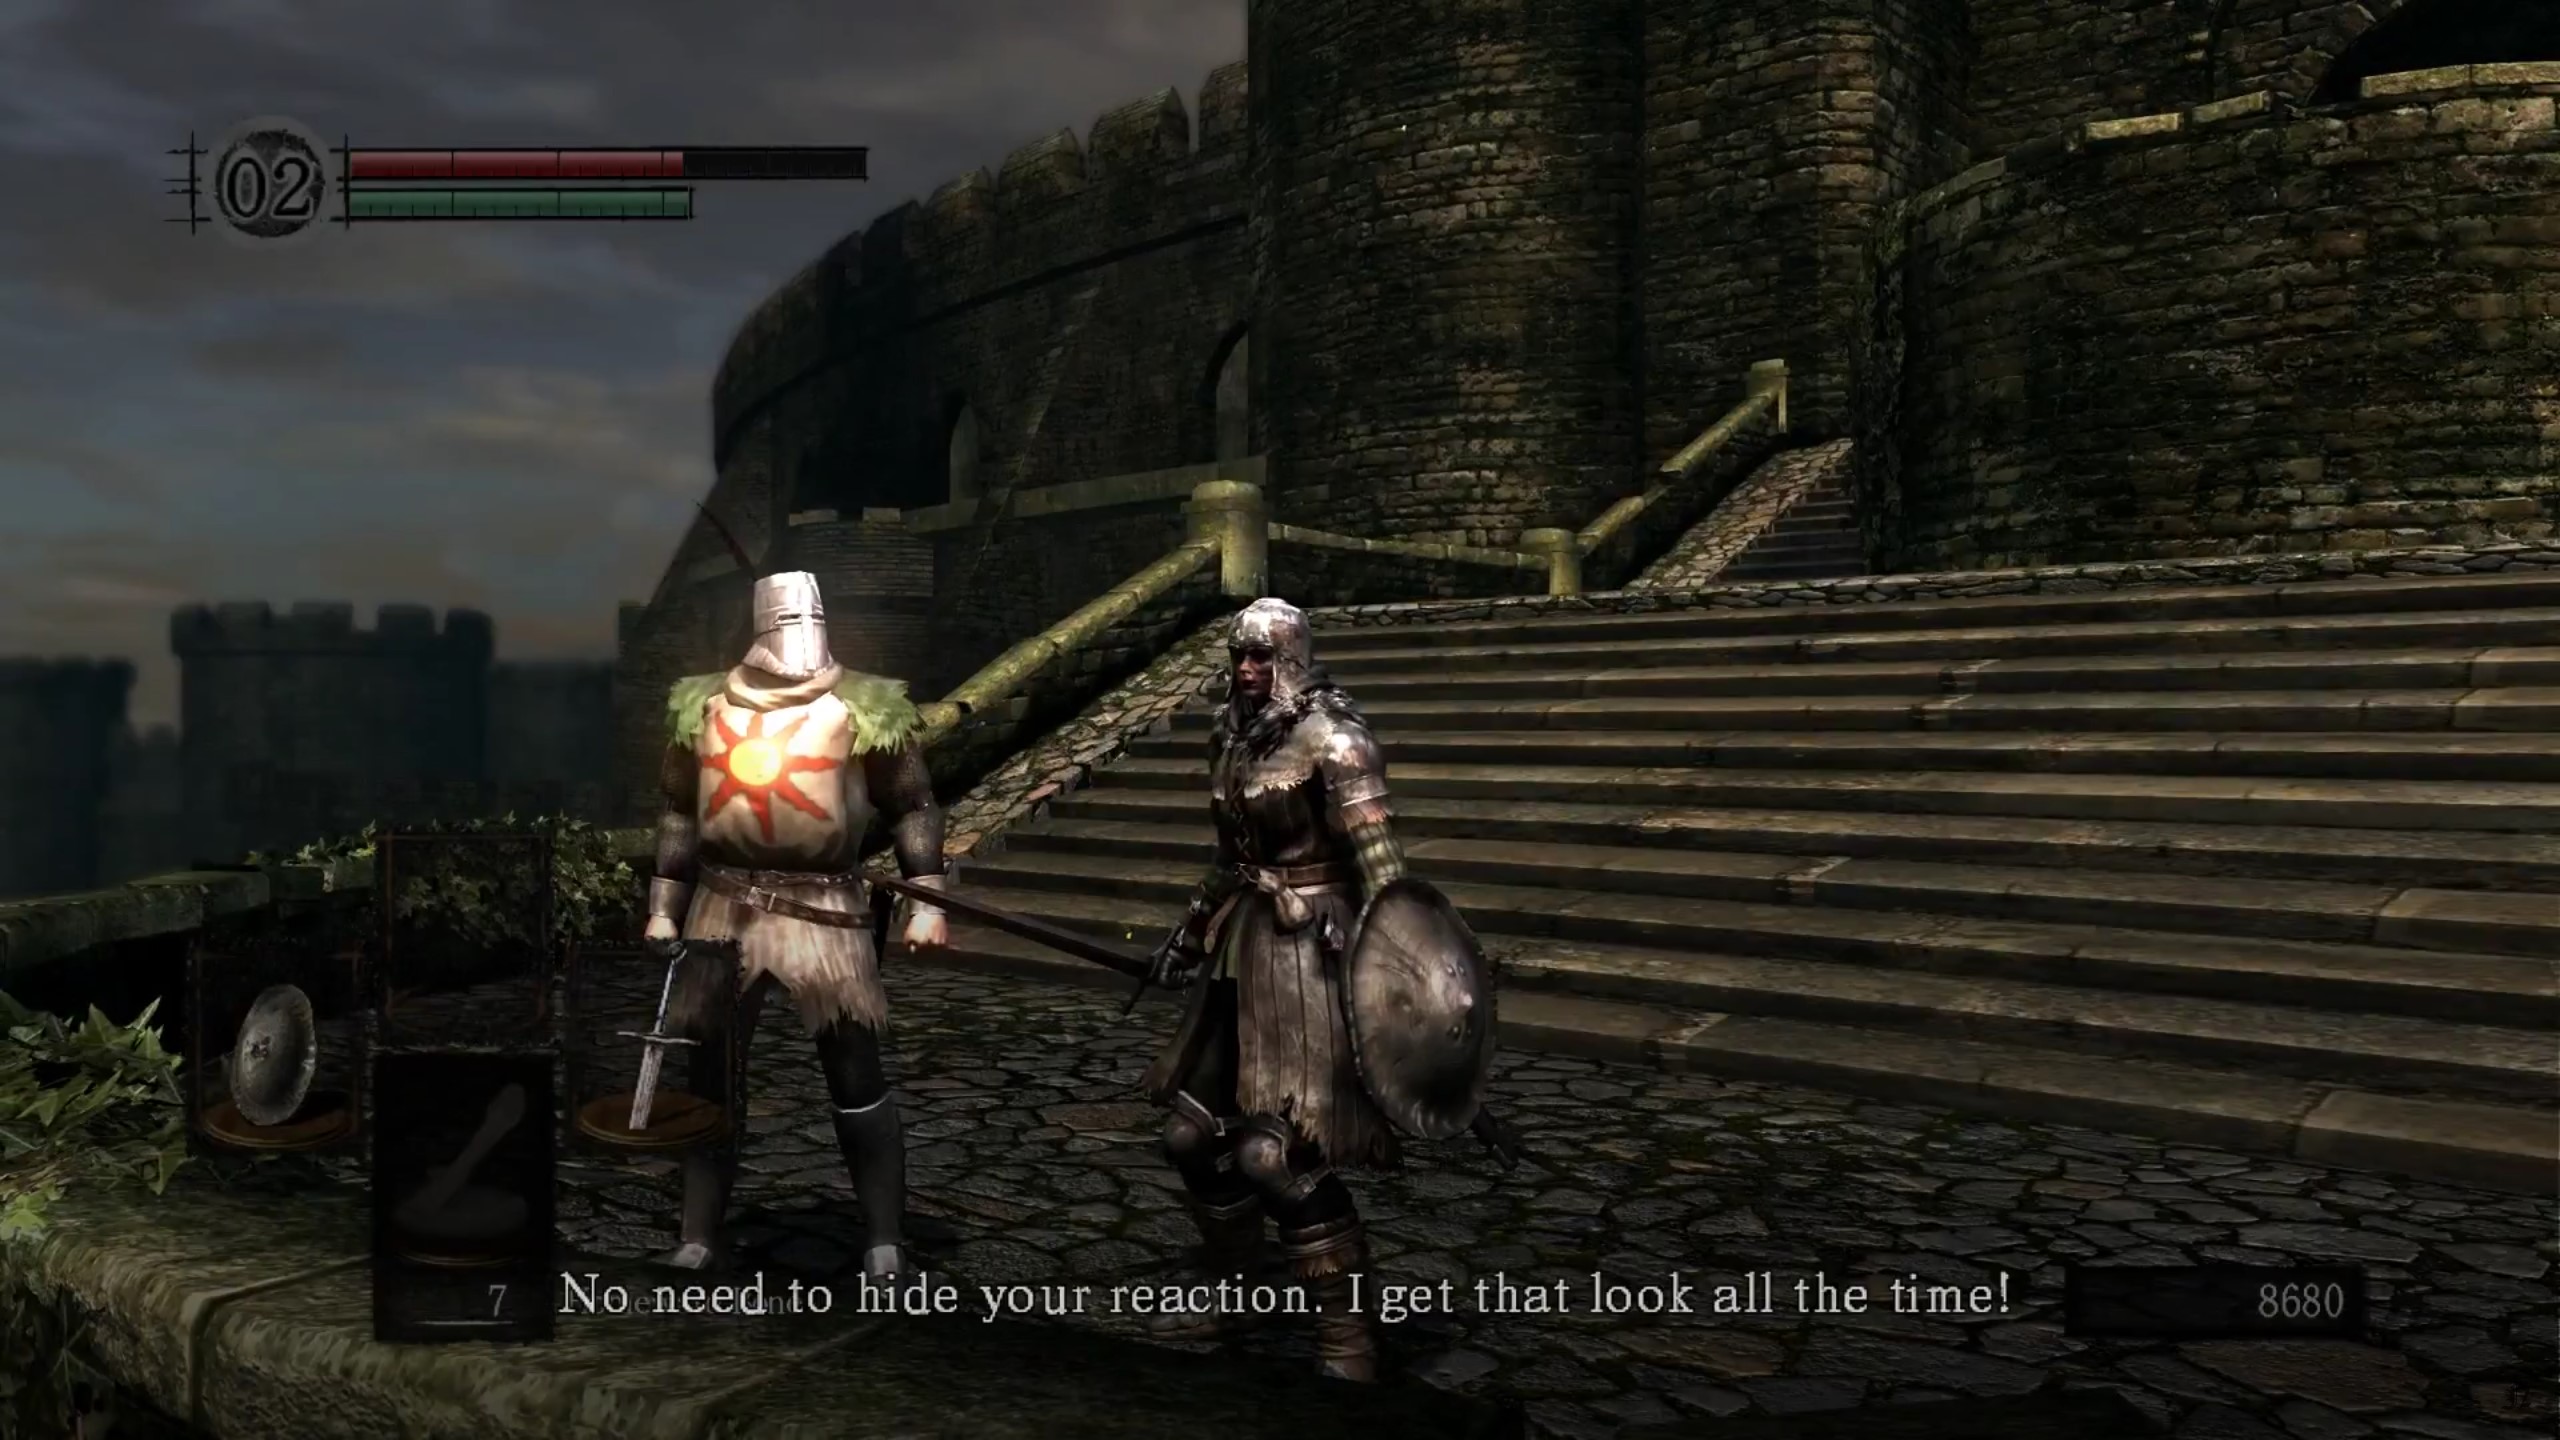 Meeting Knight Solaire in Dark Souls. Solaire: No need to hide your reaction. I get that look all the time!